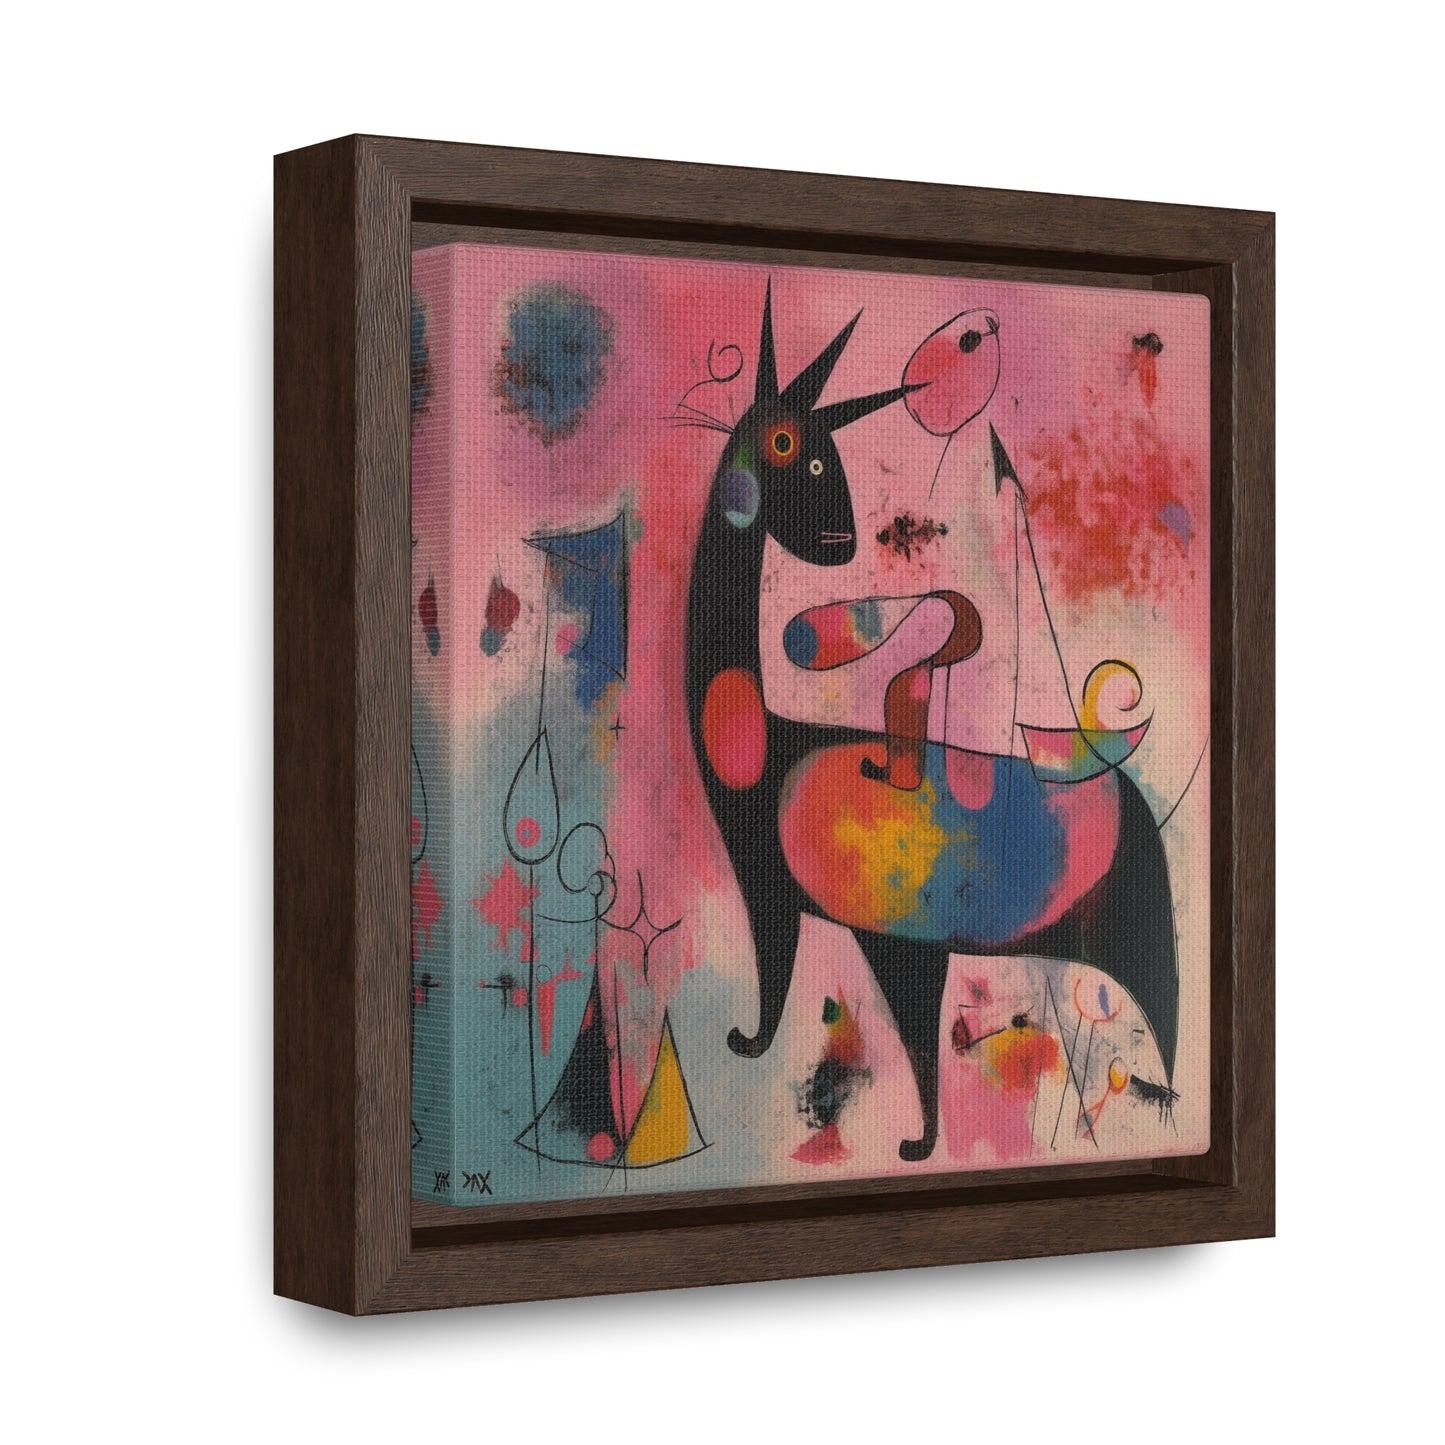 The Dreams of the Child 37, Gallery Canvas Wraps, Square Frame